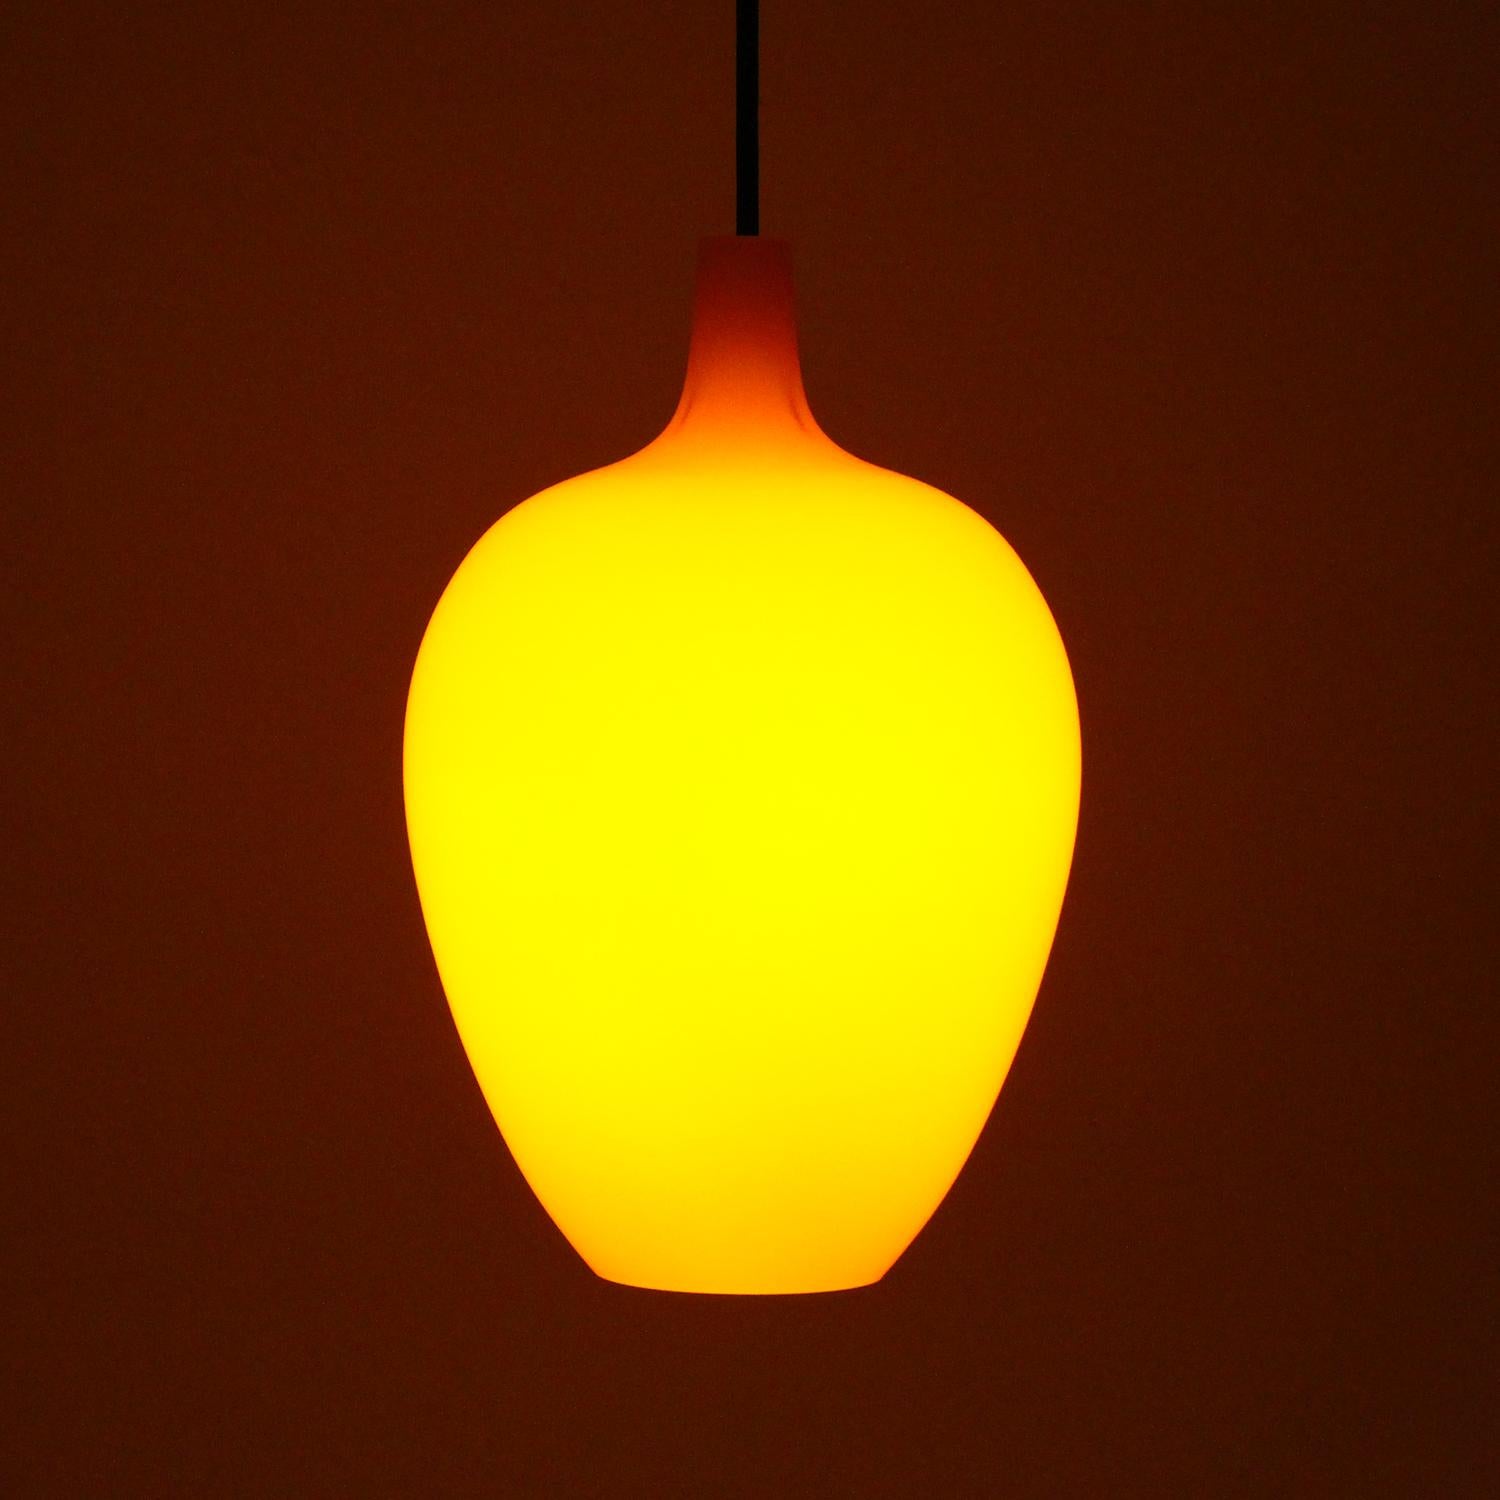 Pompei, orange blown glass pendant light by Jo Hammerborg in 1963 and produced by Fog & Mørup in collaboration with Holmegaard Glassworks - truly amazing glass ceiling light in very good, near excellent vintage condition.

An elegantly shaped